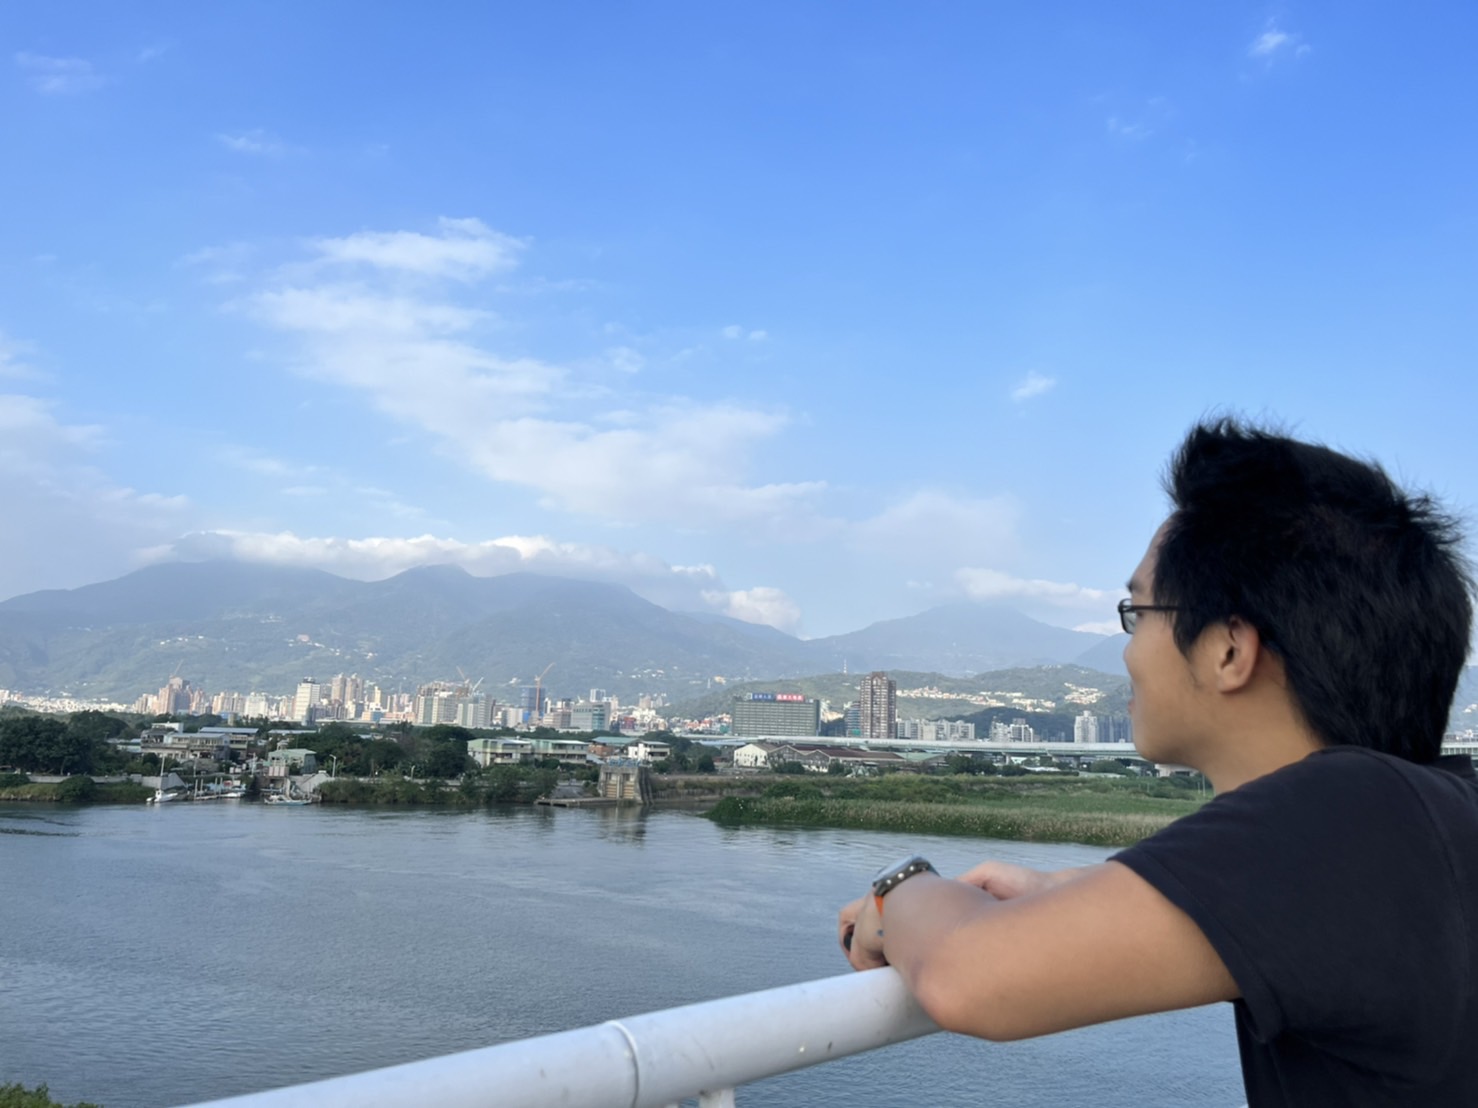 Looking over the Keelung River